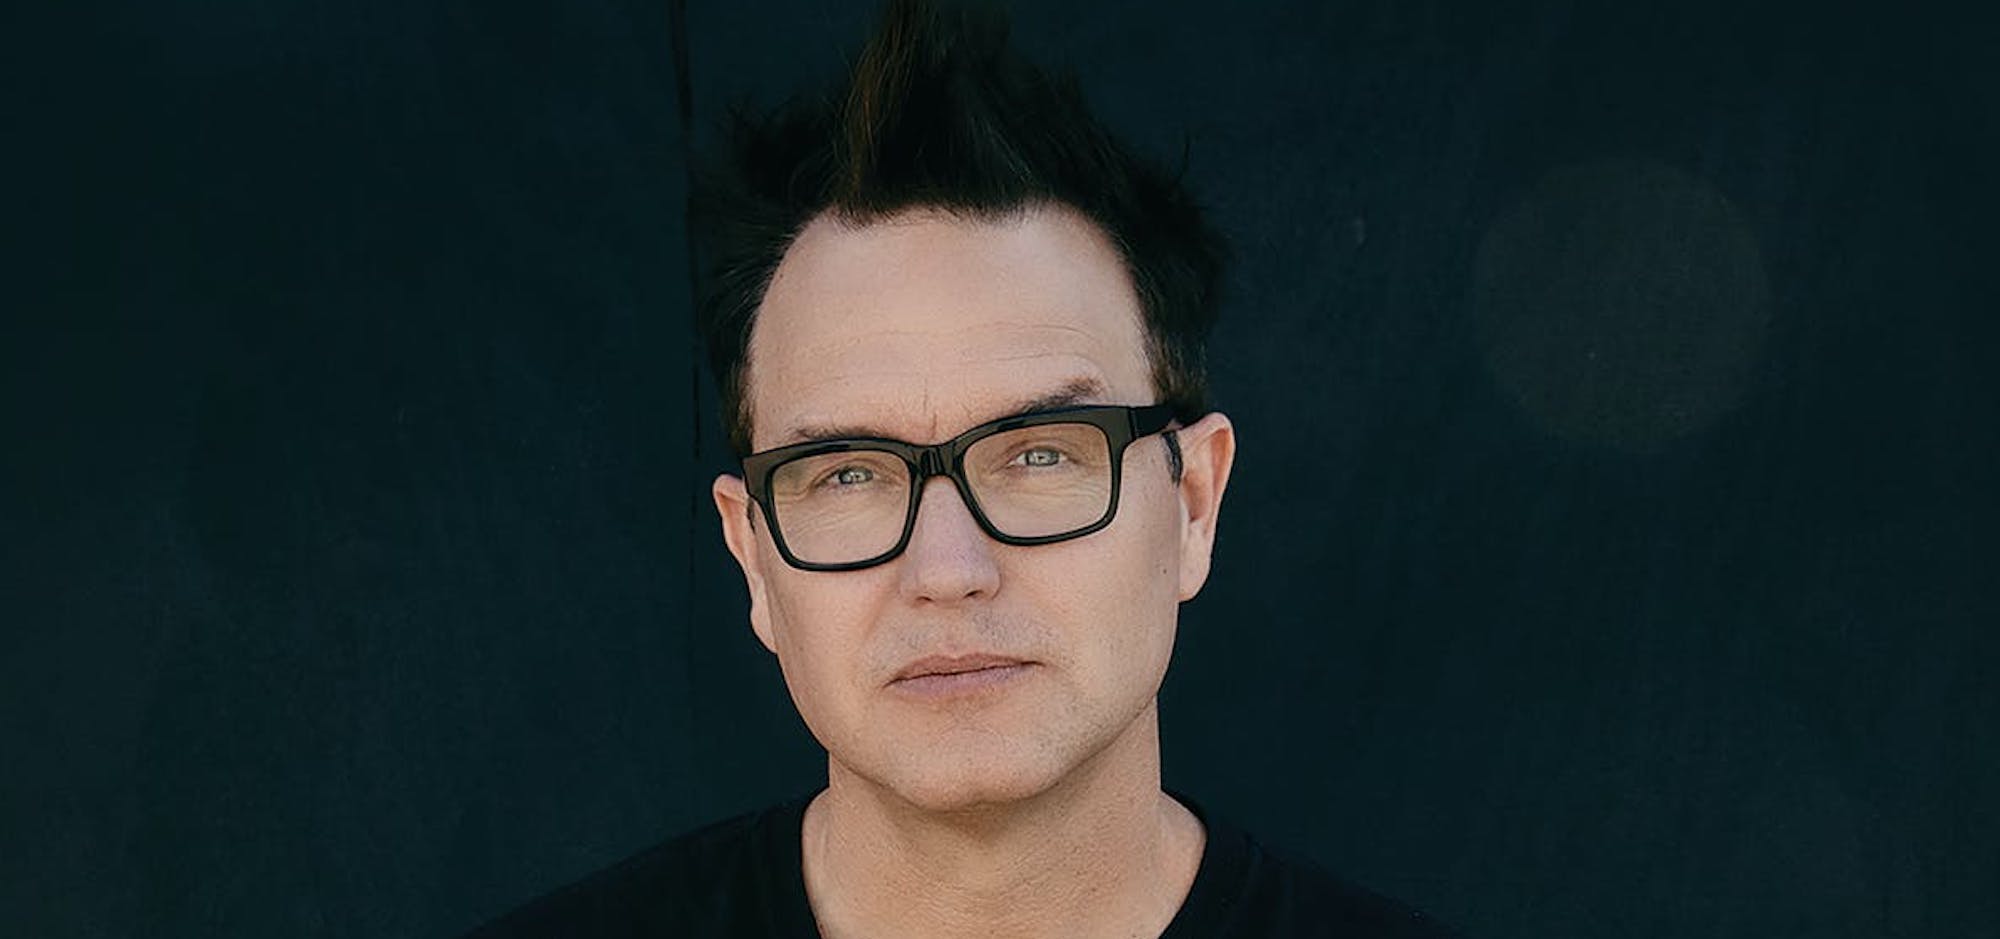 Blink-182’s Mark Hoppus Reveals He Has Stage 4 Lymphoma, and “The Chemo is Working”